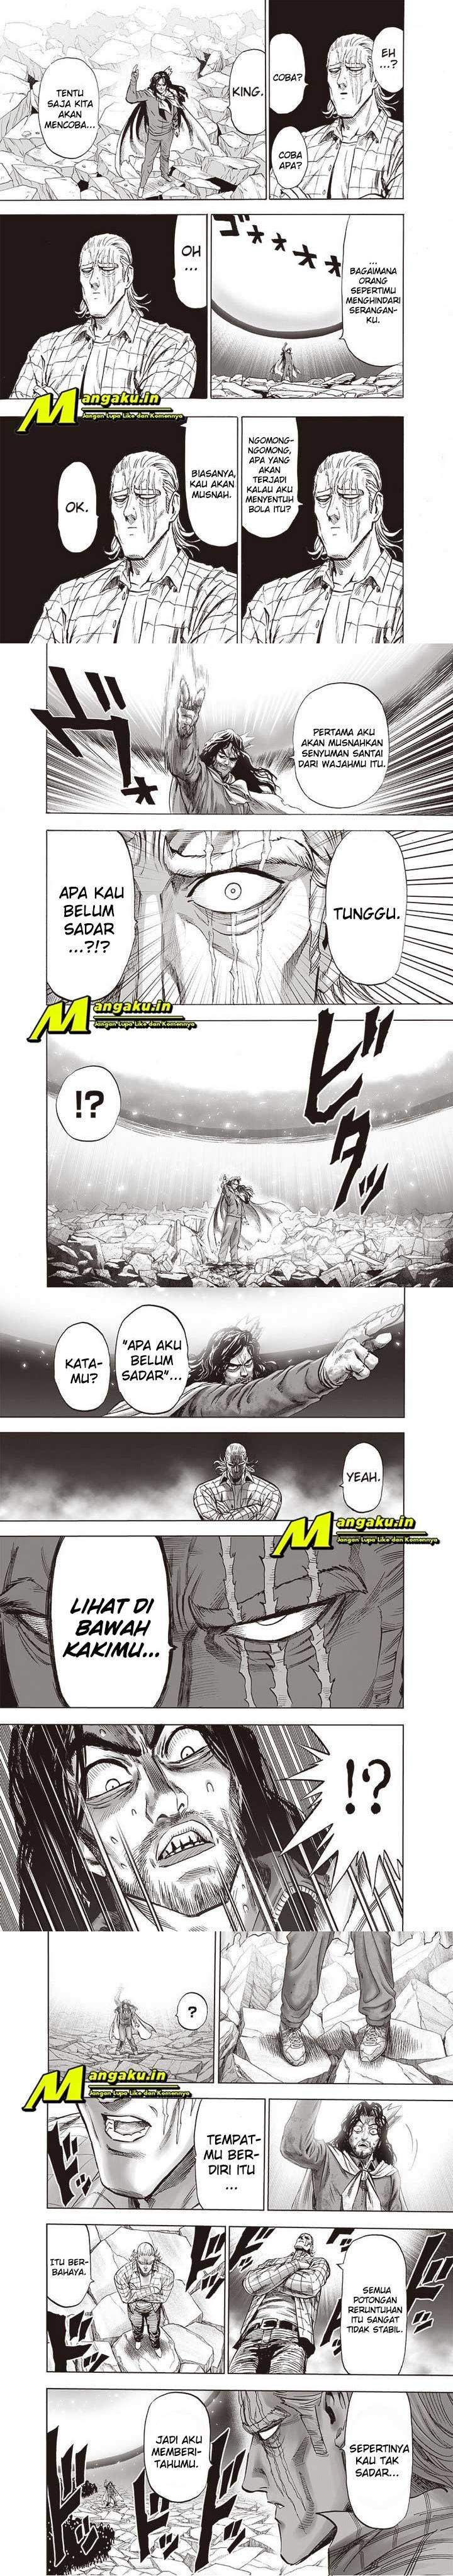 One Punch Man Chapter 202